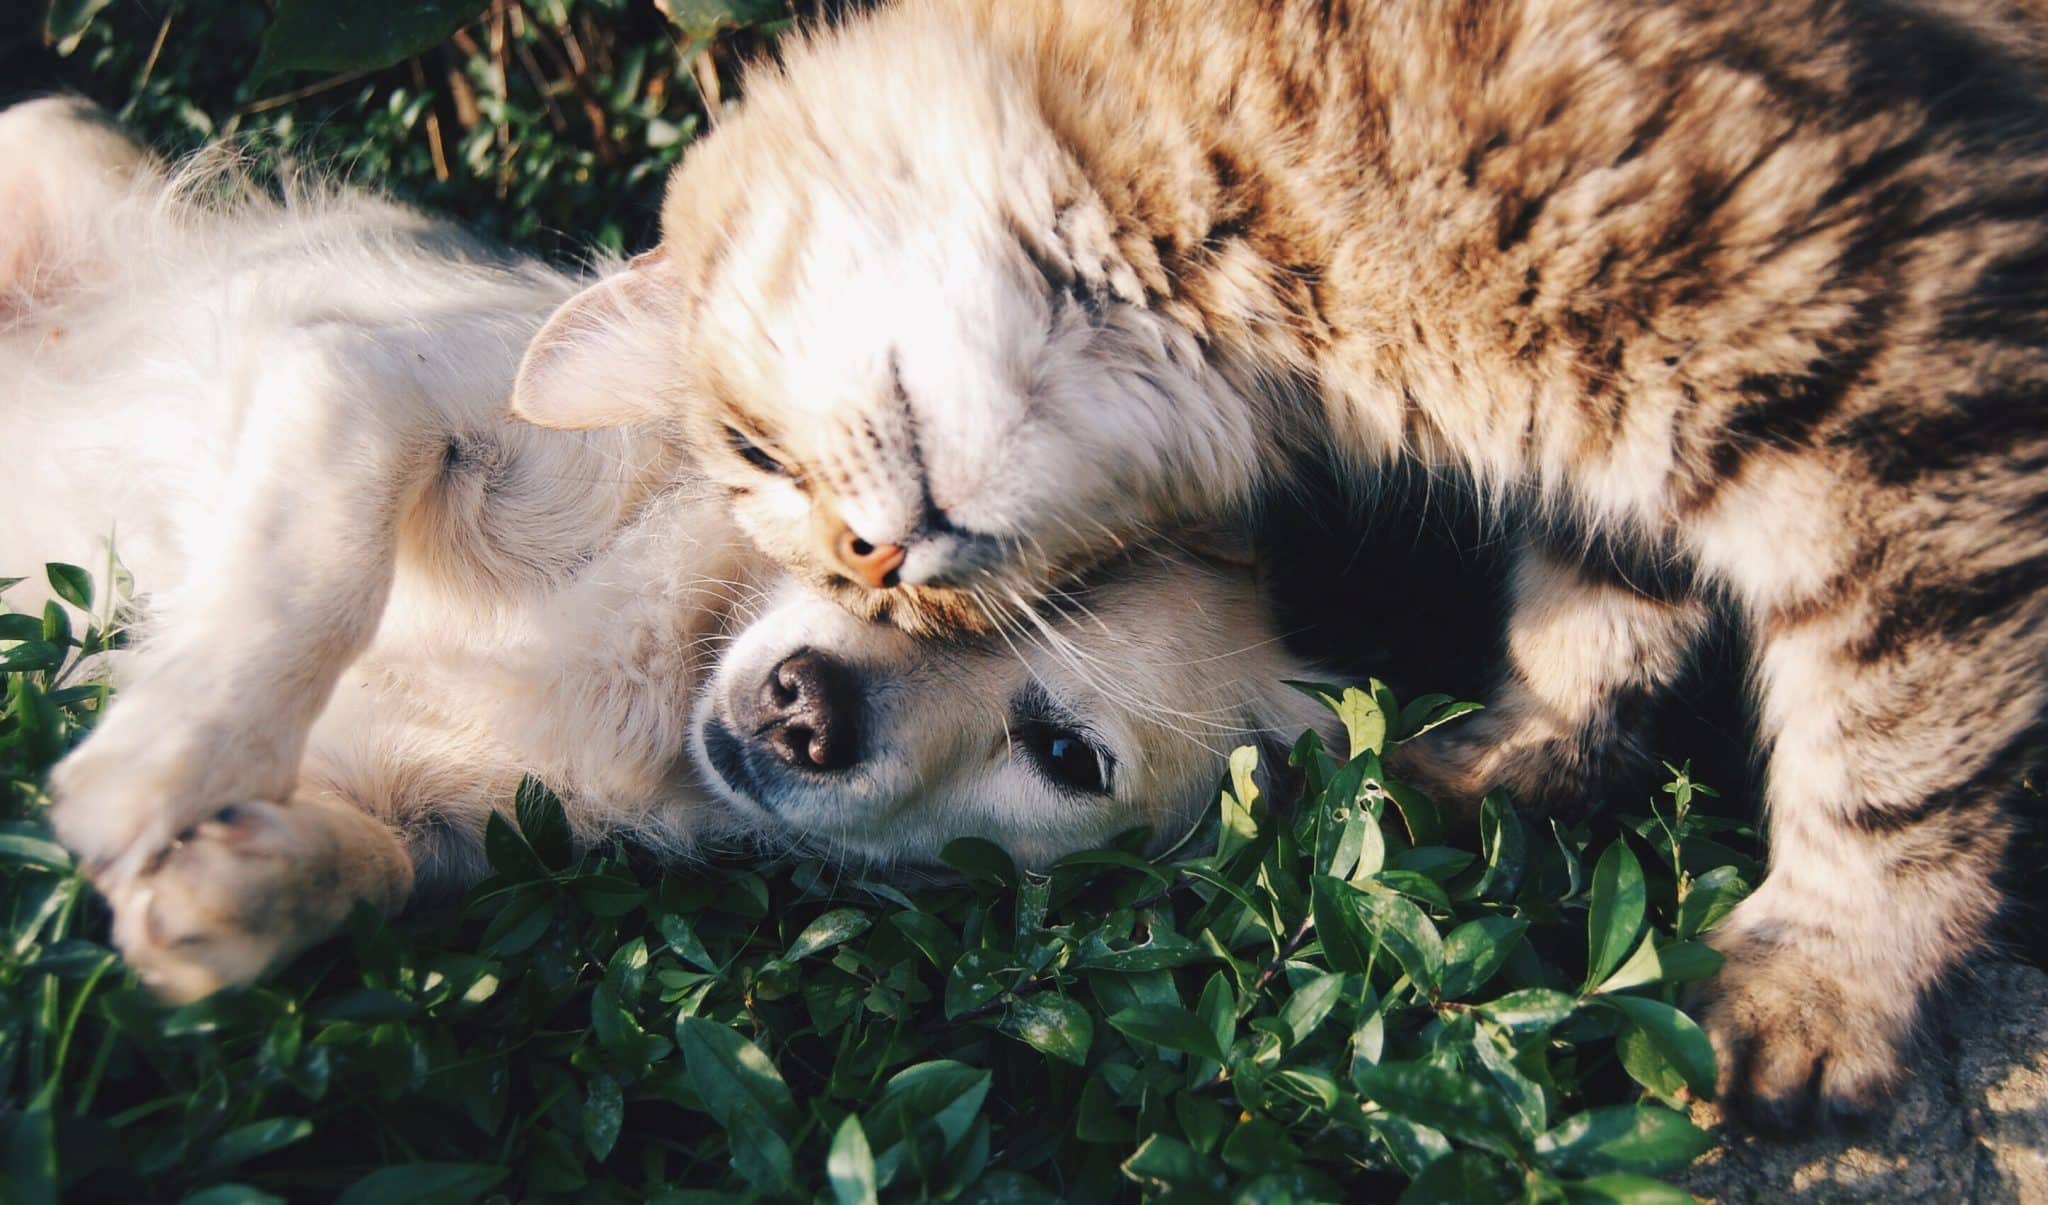 pets like dogs and cats can help support during addiction recovery